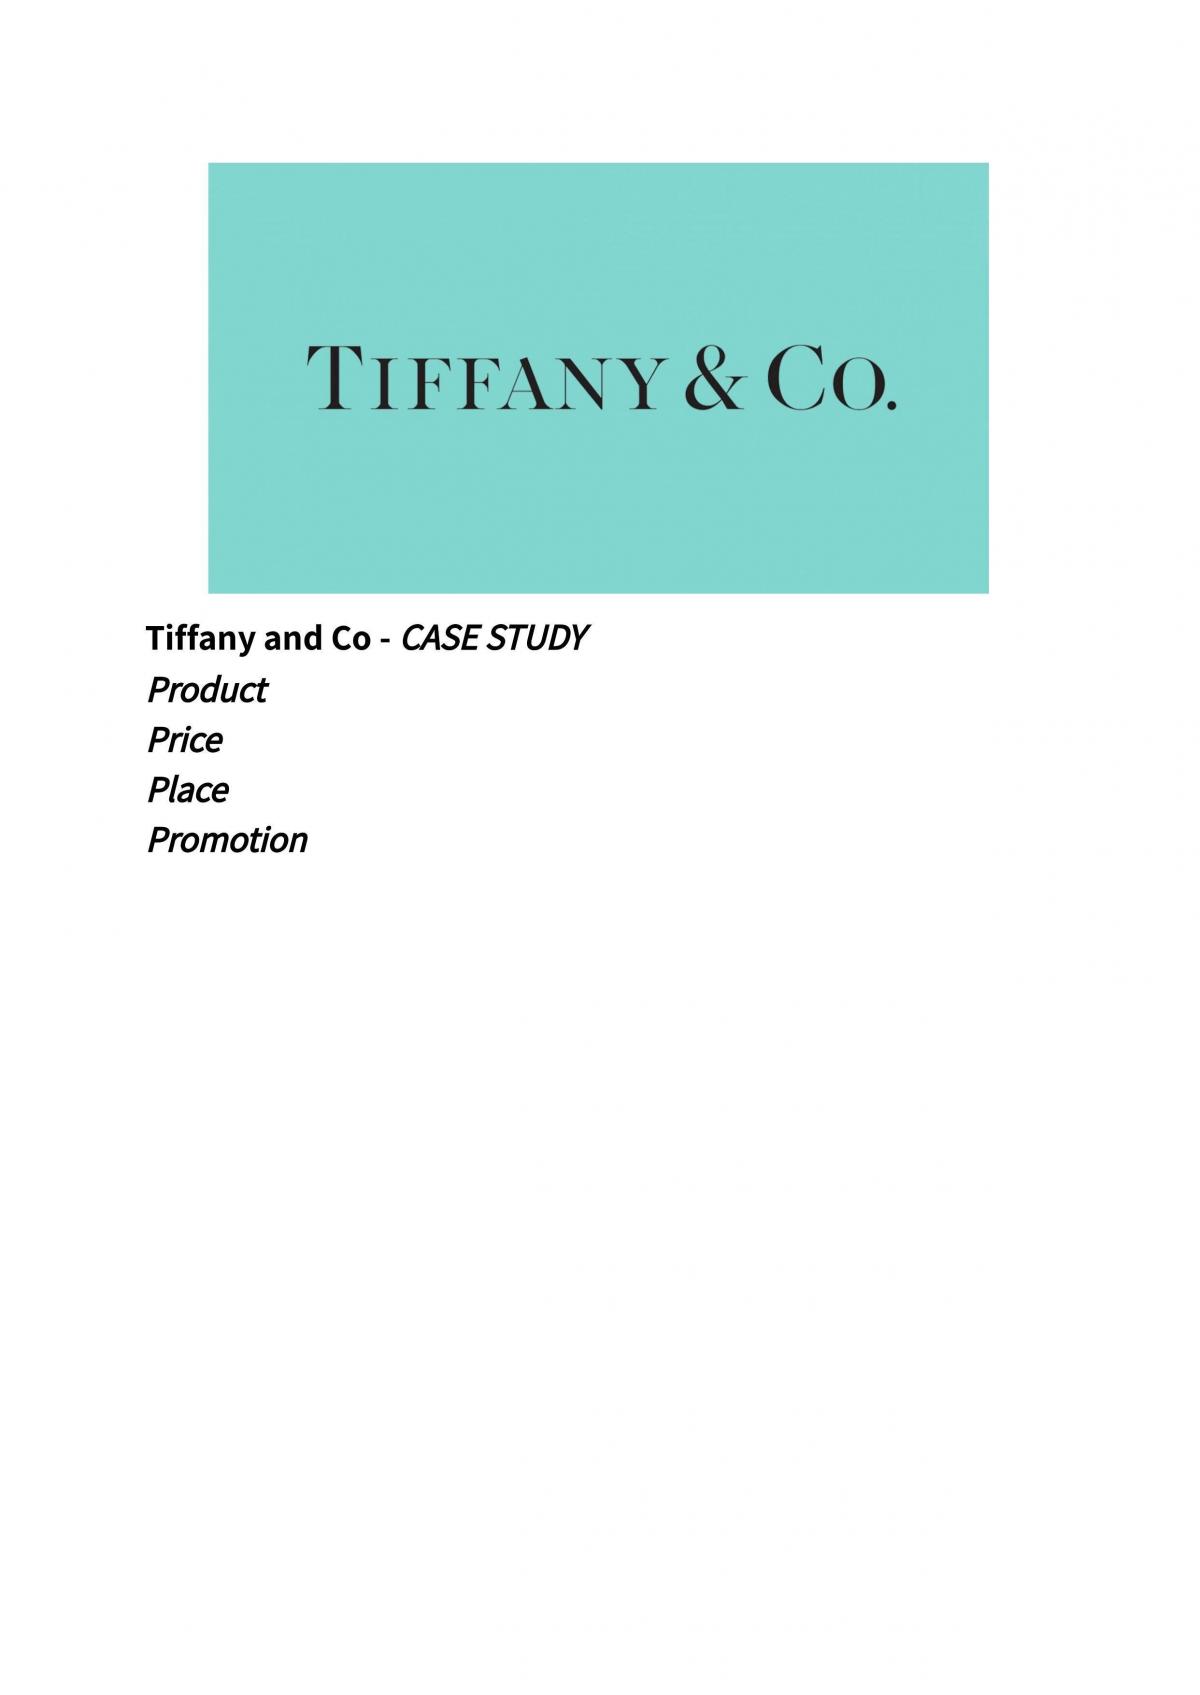 tiffany and co case study